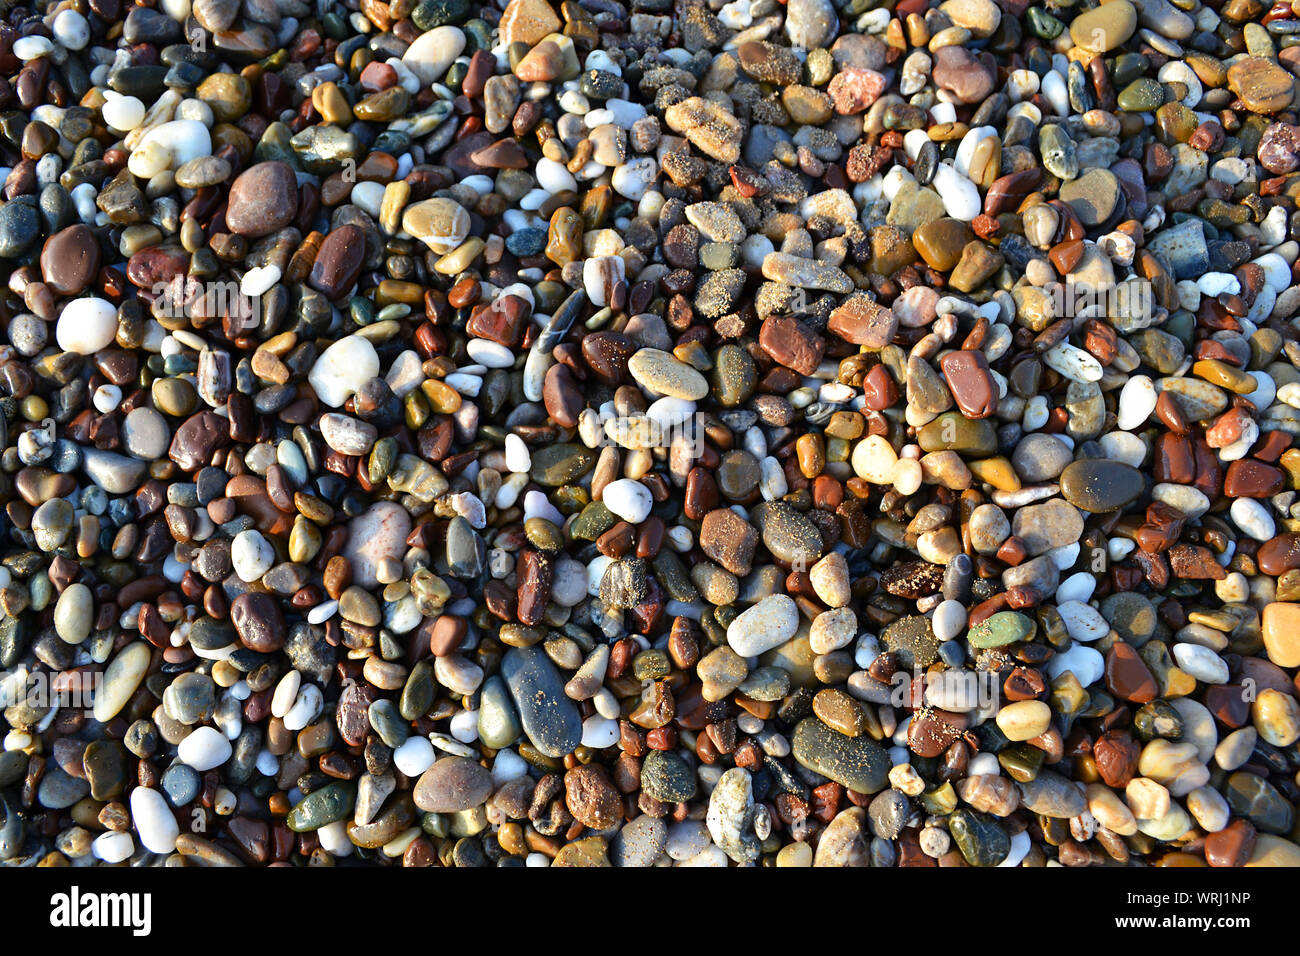 Top-view of many wet and sandy sea stones of different colour, form and size at the beach Stock Photo